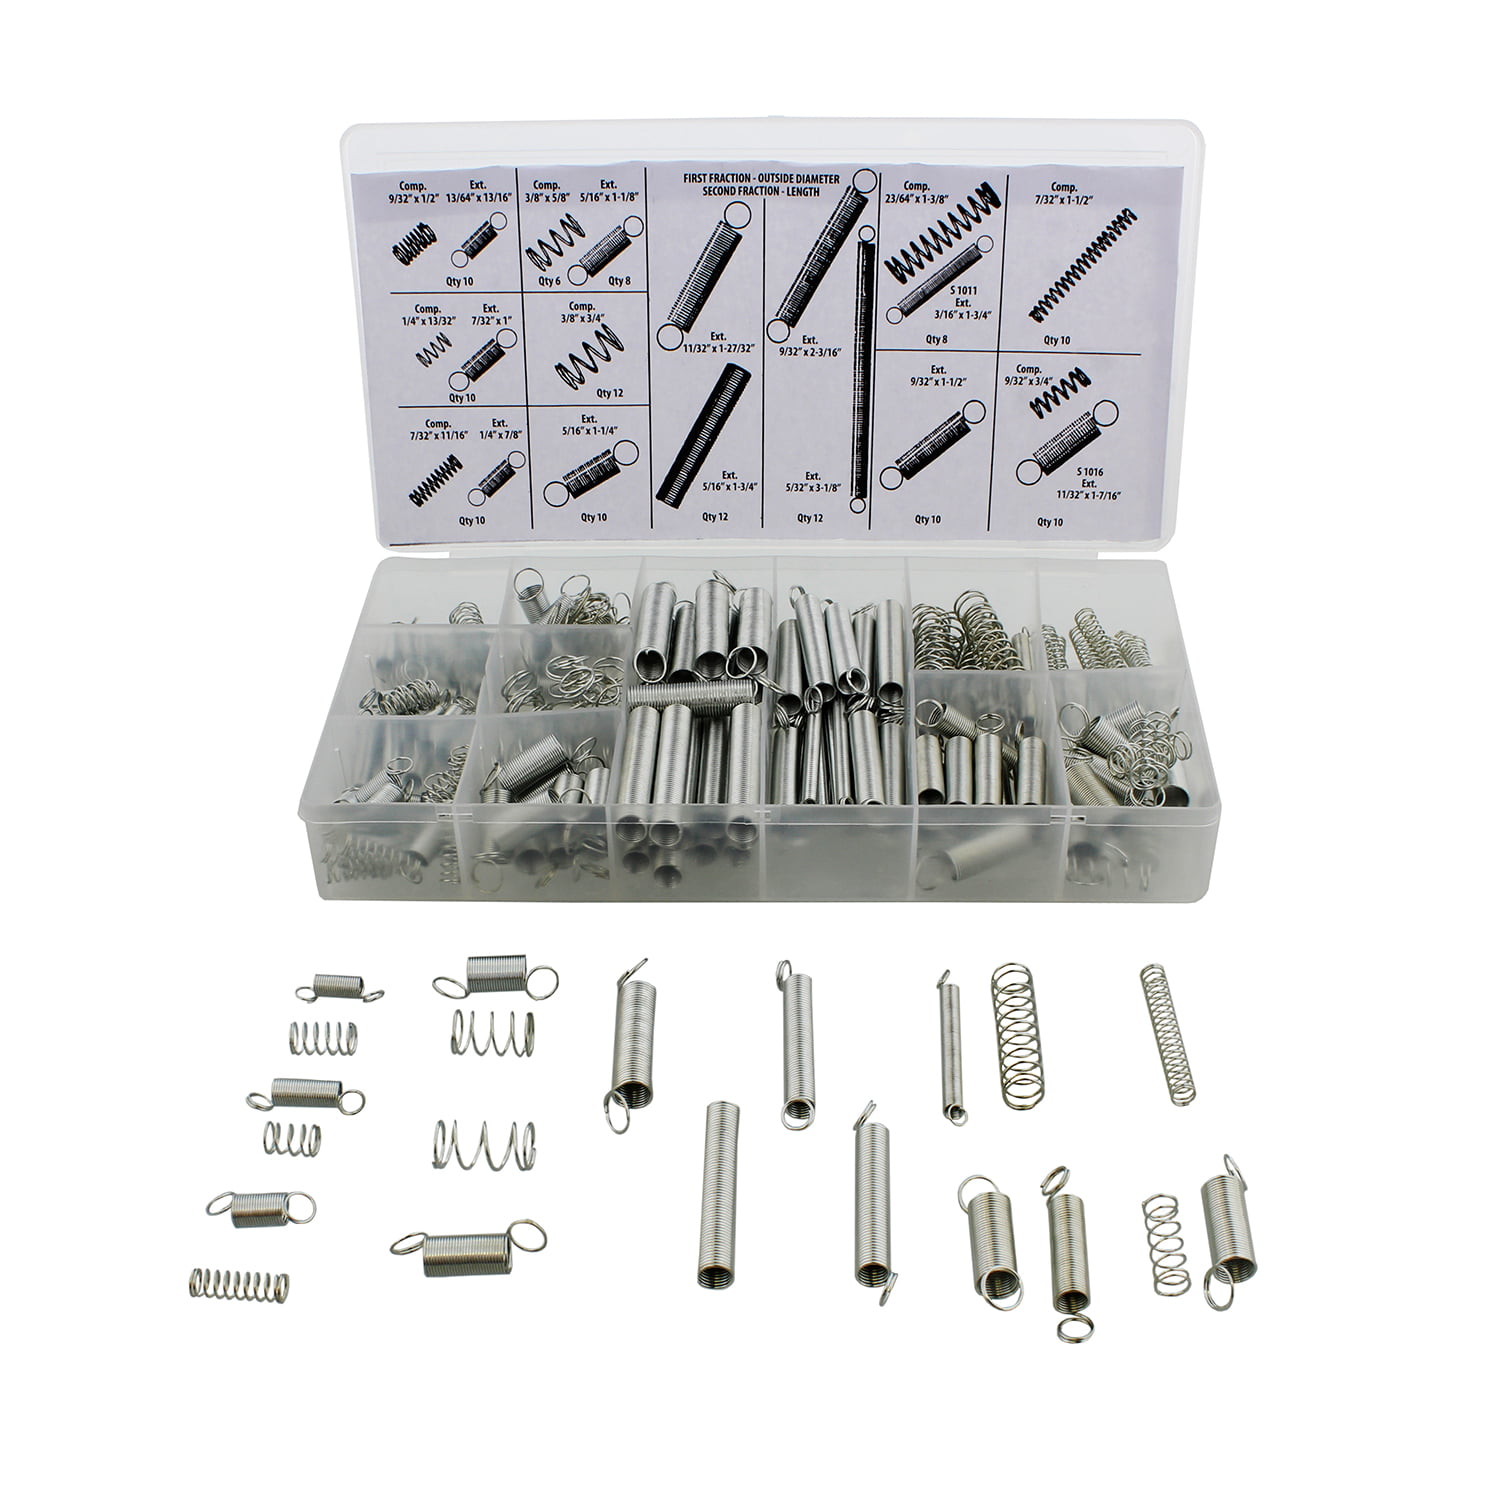 200 Pcs Compression Extension Springs Assorted Spring Set Spring Assorted Kit with a Storage Box 